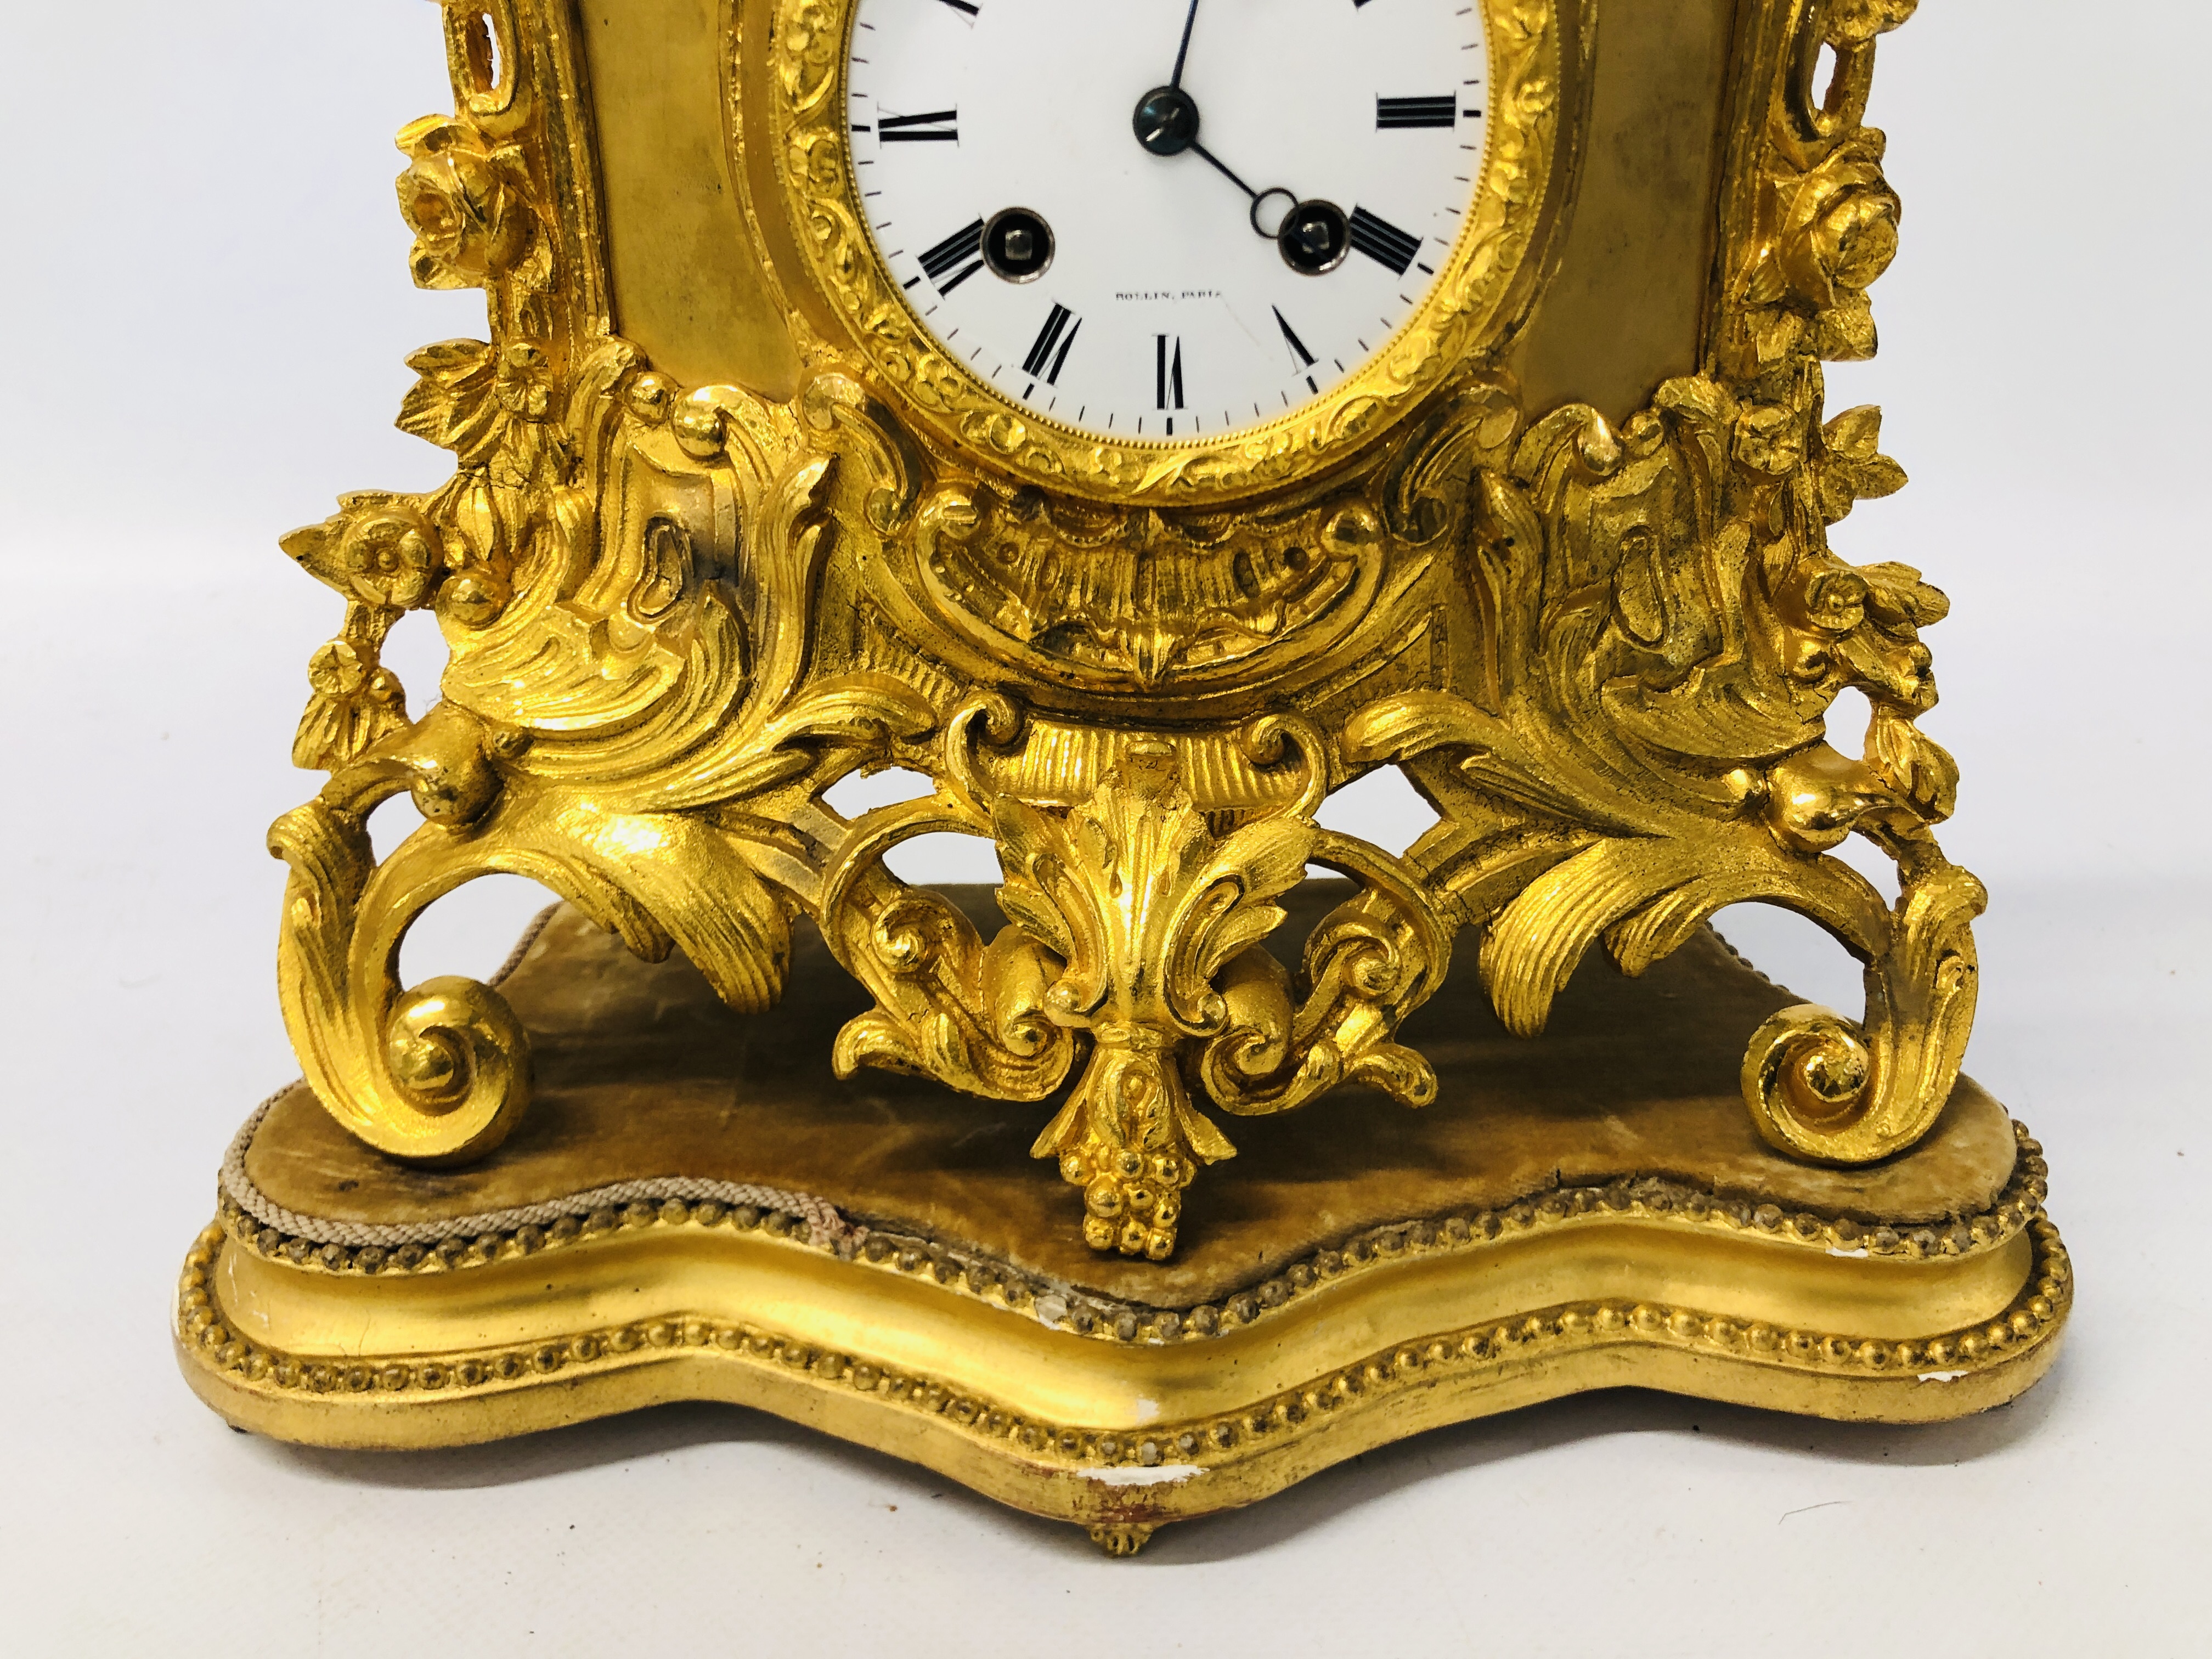 C19TH FRENCH ORMOLU CLOCK MARKED "ROLLIN" PARIS WITH GLASS DOME - Image 5 of 9